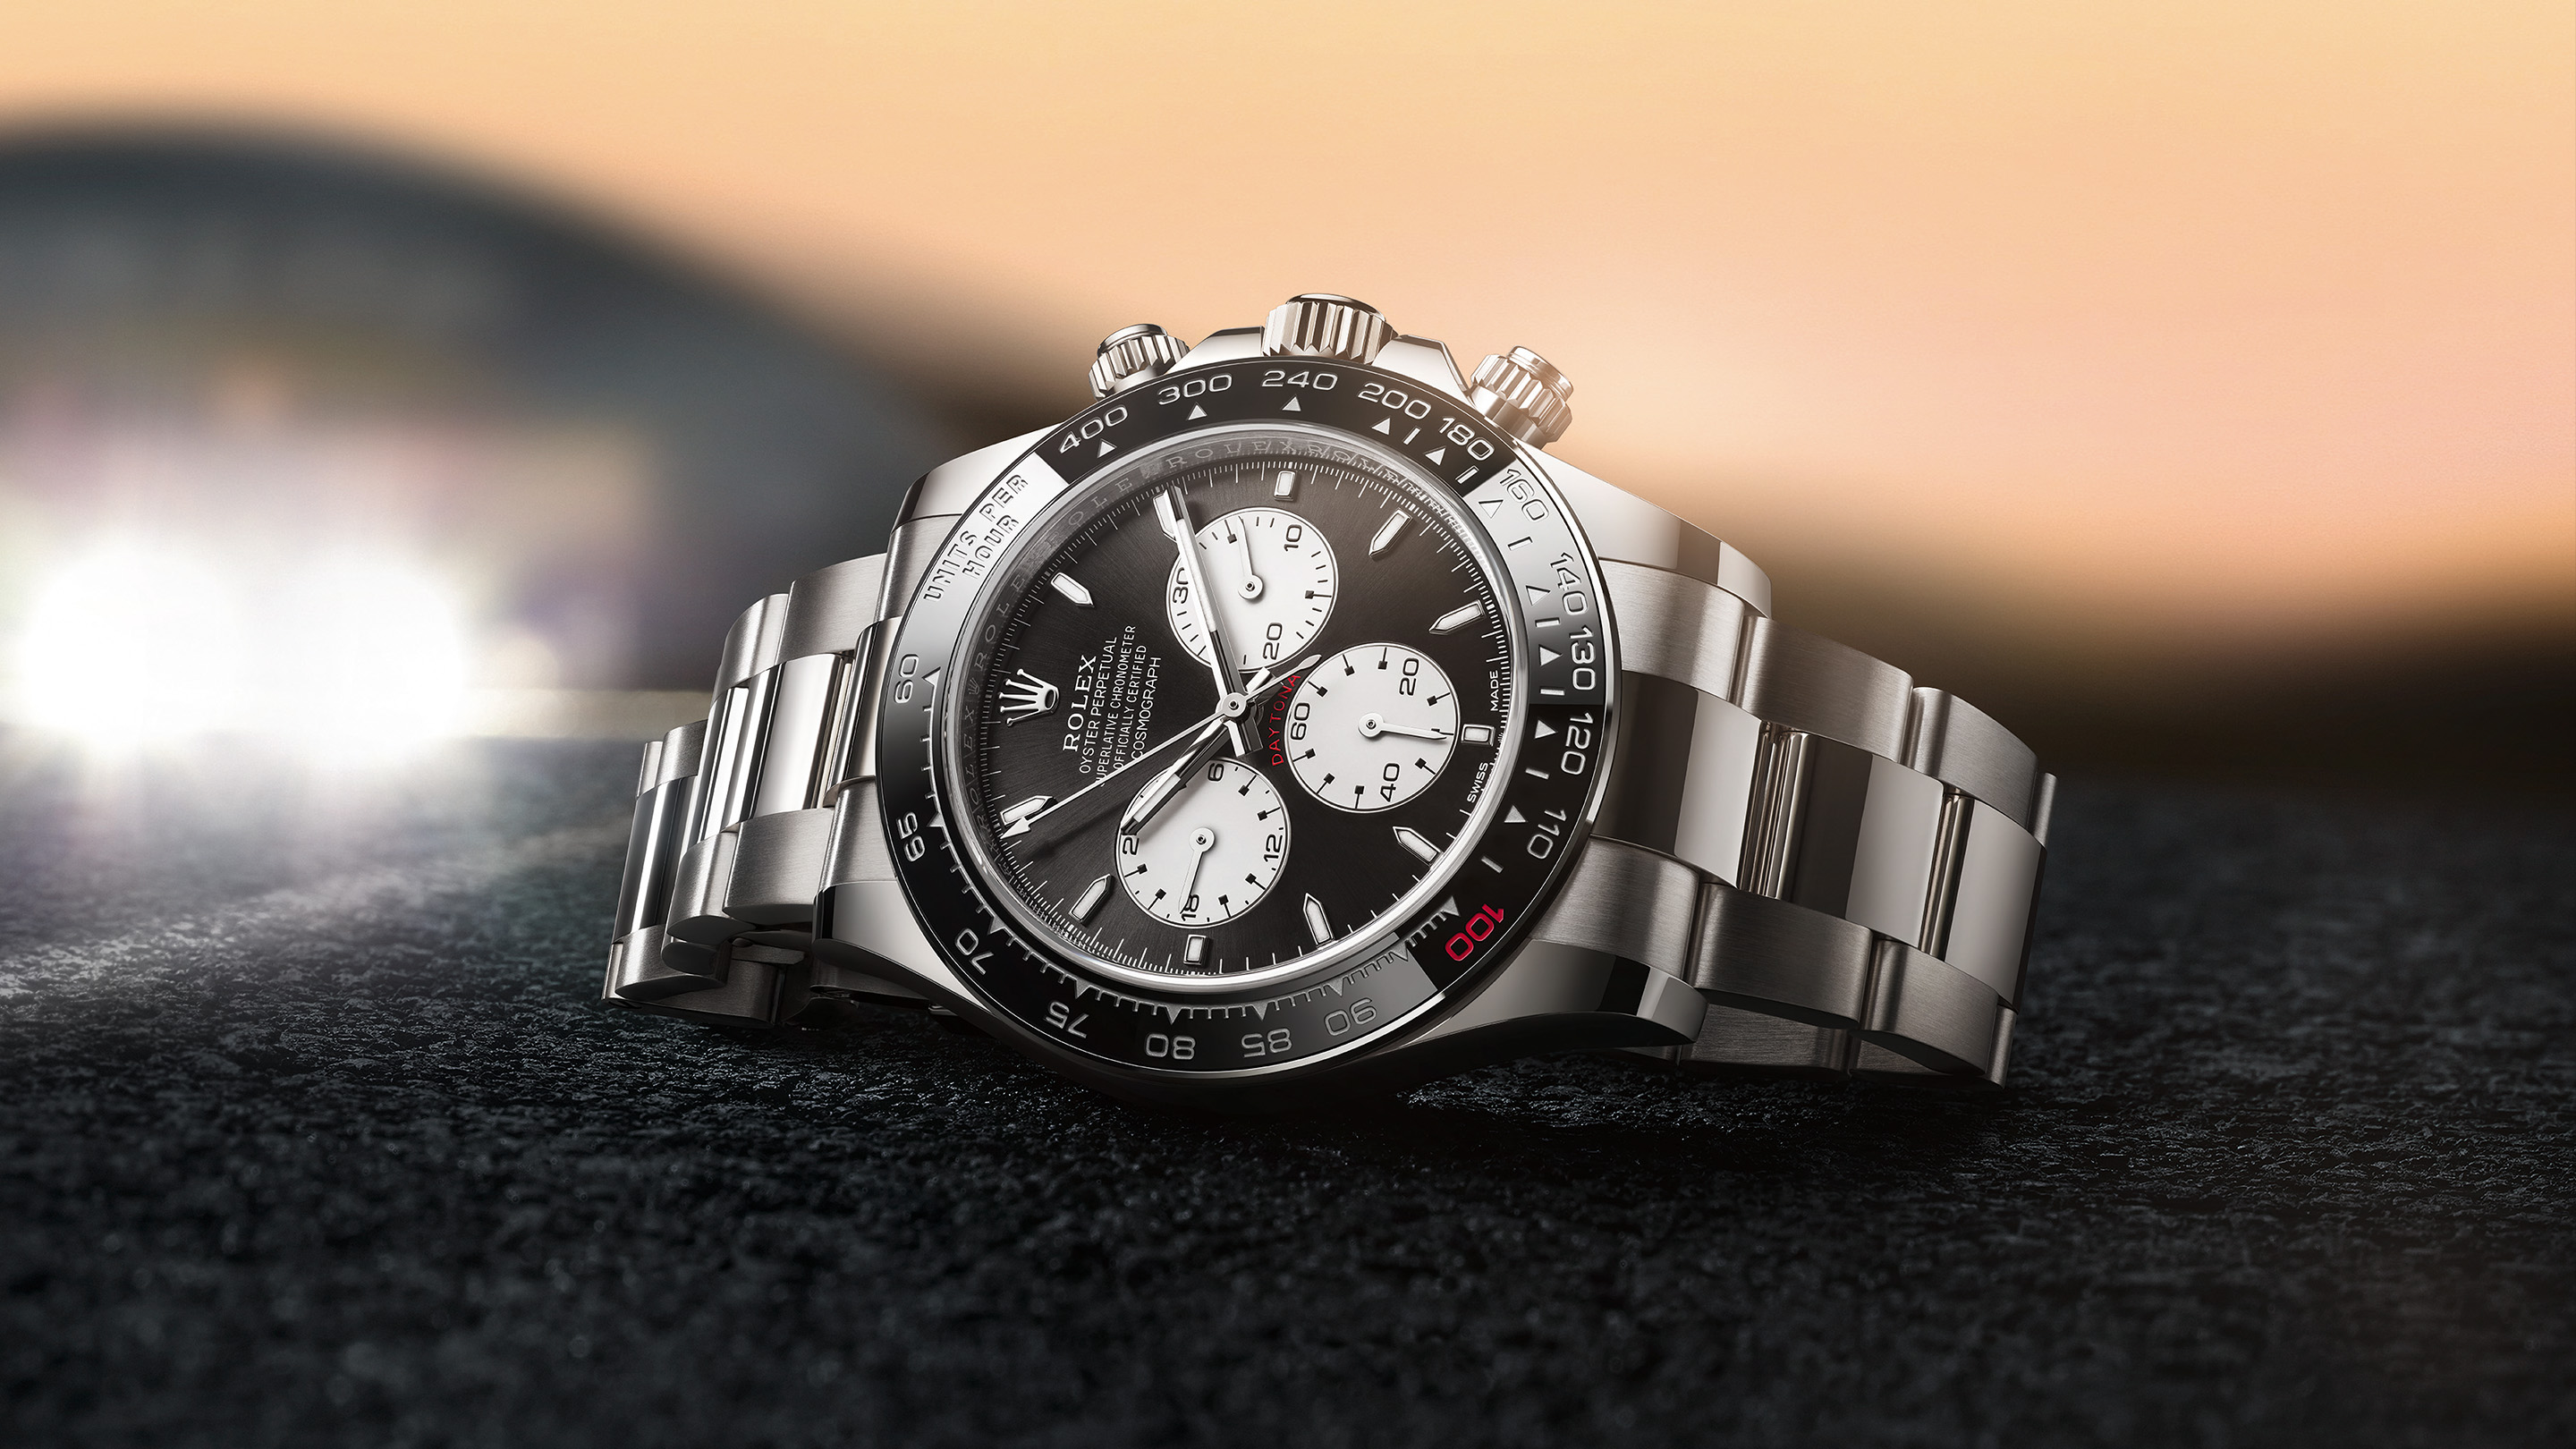 Introducing A Special Rolex Daytona For The 100th Running Of The 24 Hours Of Le Mans (With Live Pics From The Race)